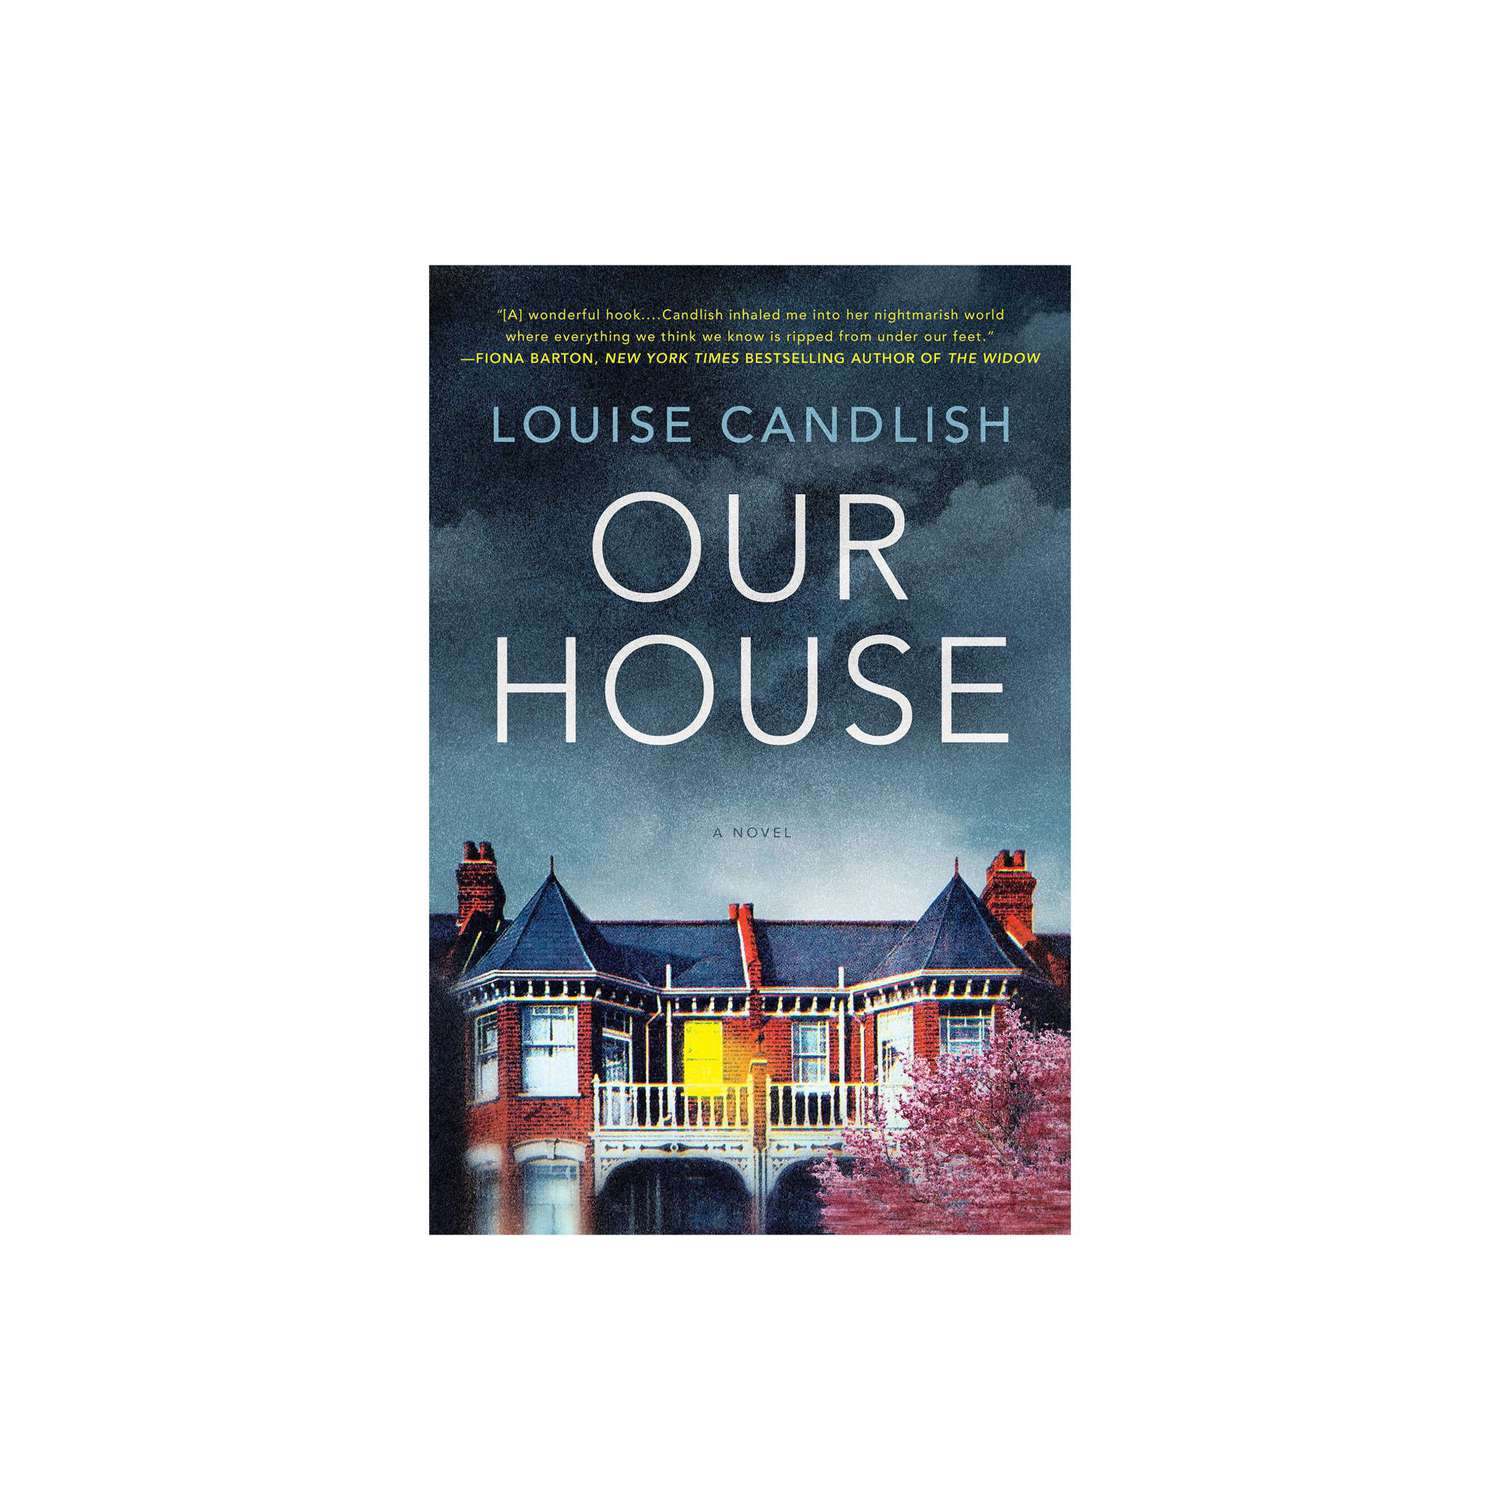 Our House, by Louise Candlish